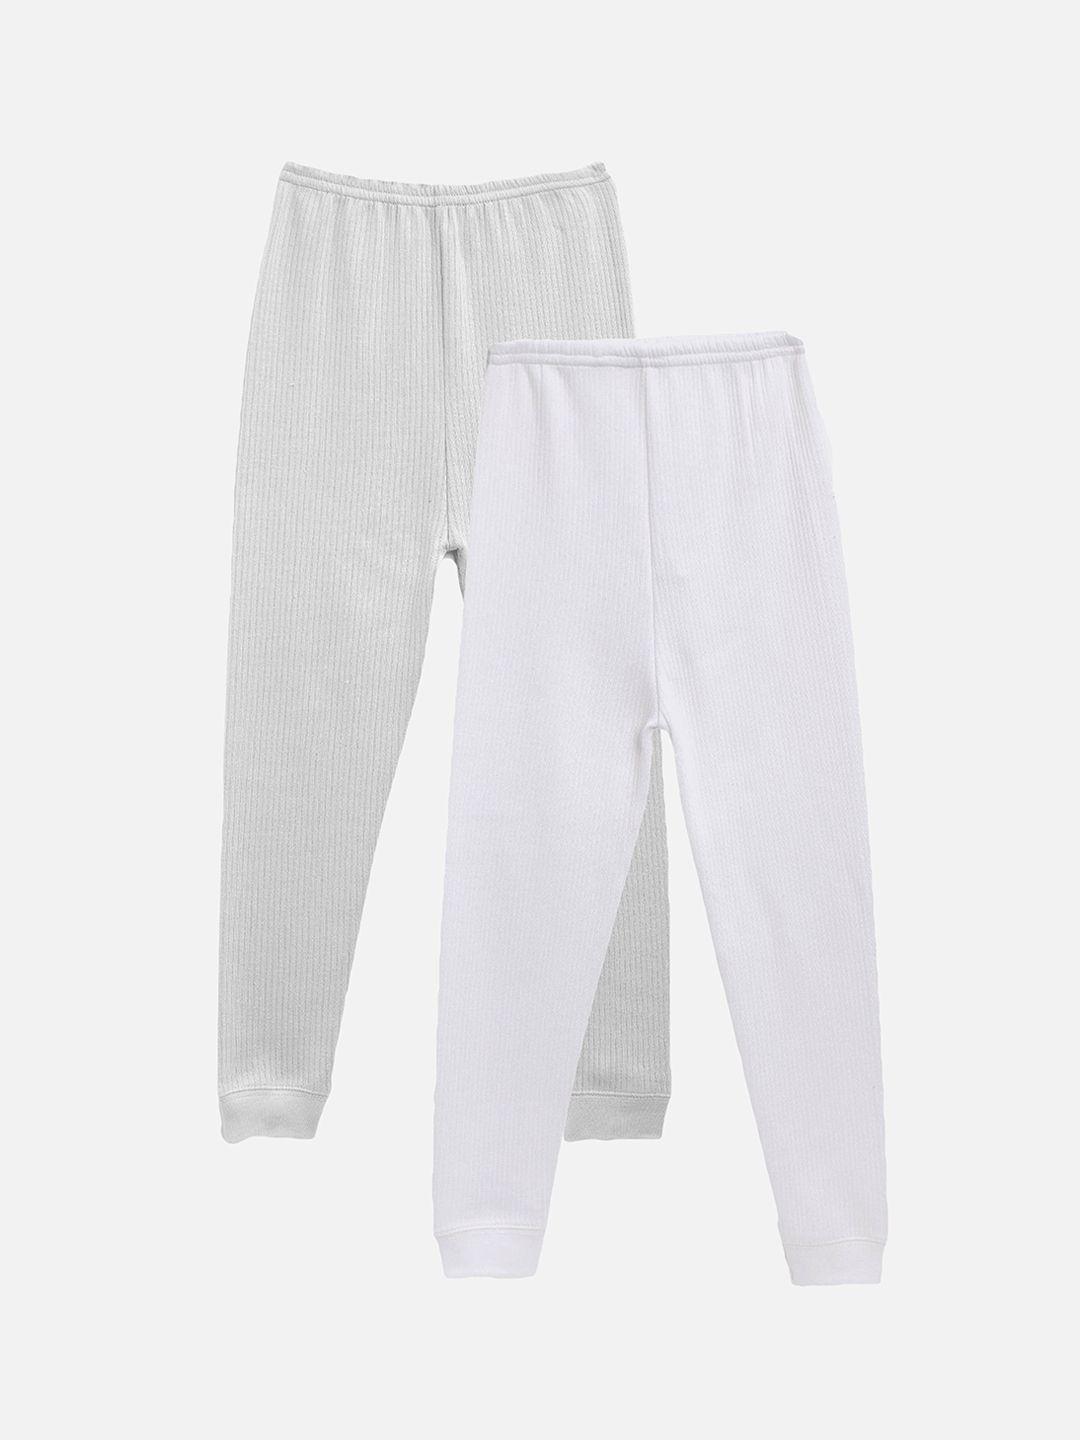 kanvin boys pack of 2 grey & white solid thermal bottoms